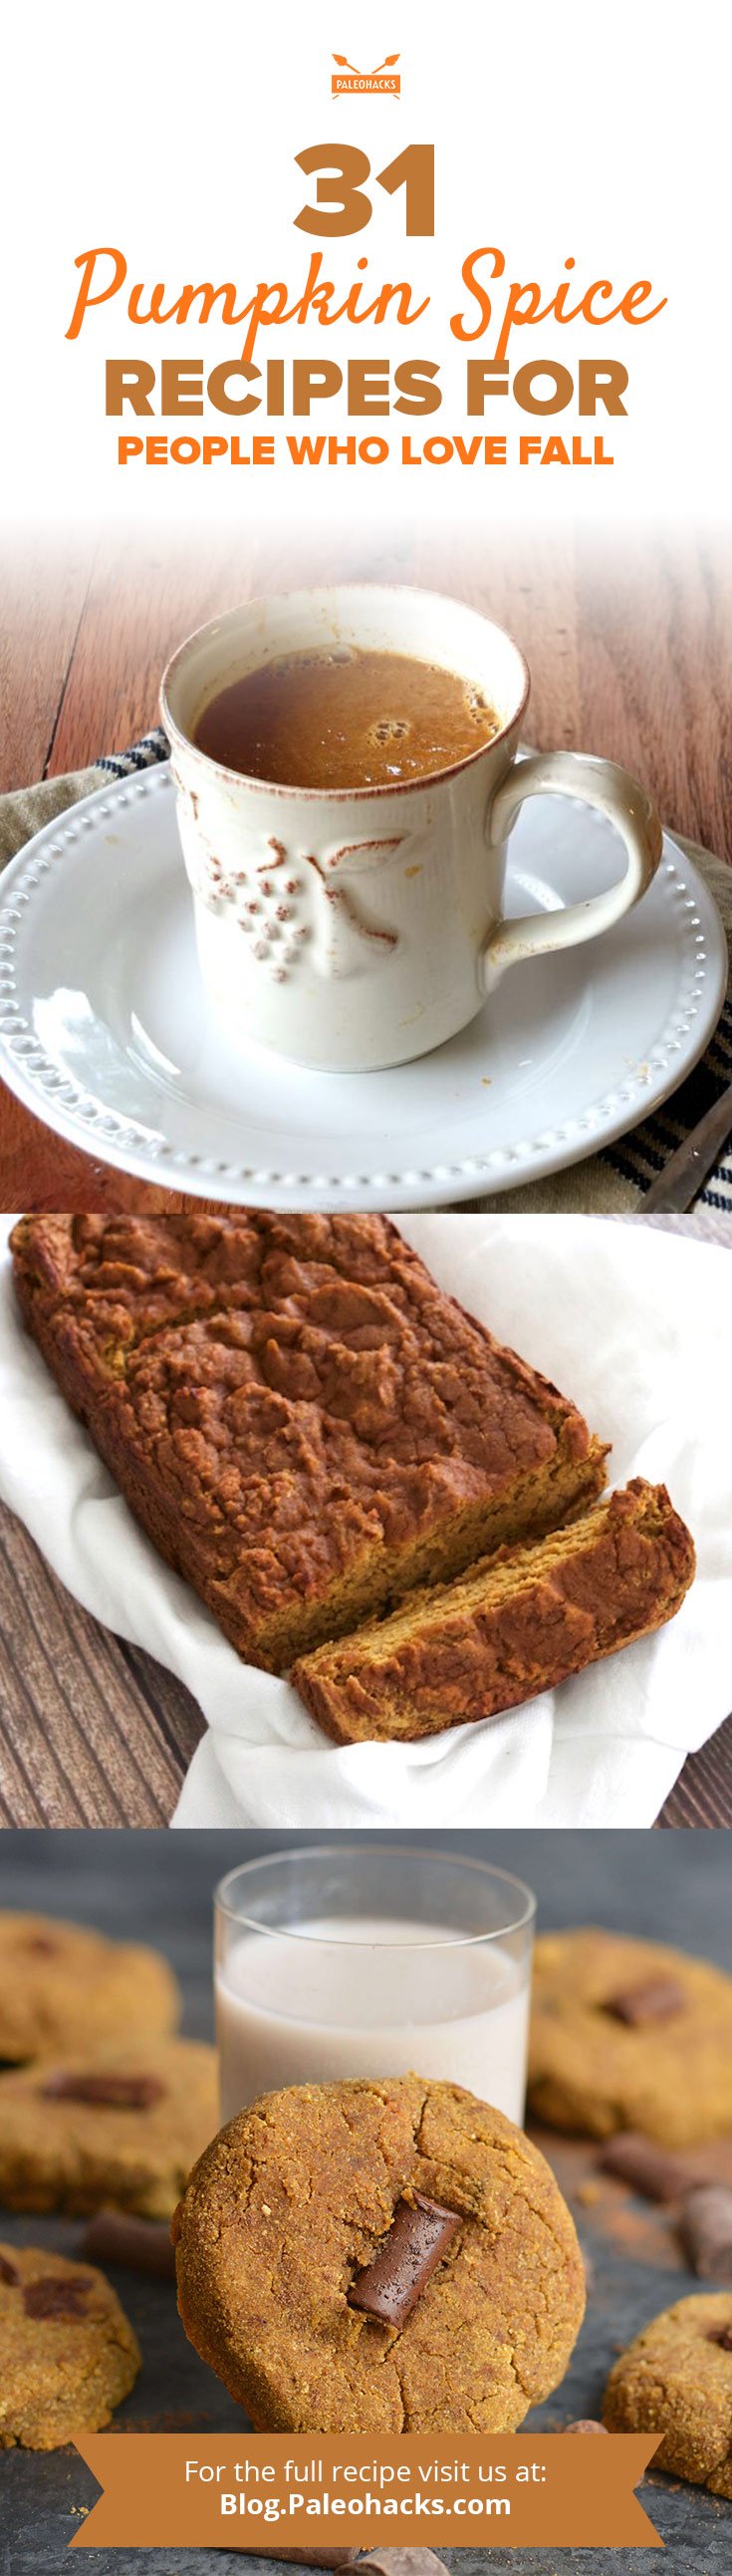 It’s not fall without these must-try Paleo pumpkin spice recipes! Lattes, flapjacks & muffins - these pumpkin spice recipes scream fall.